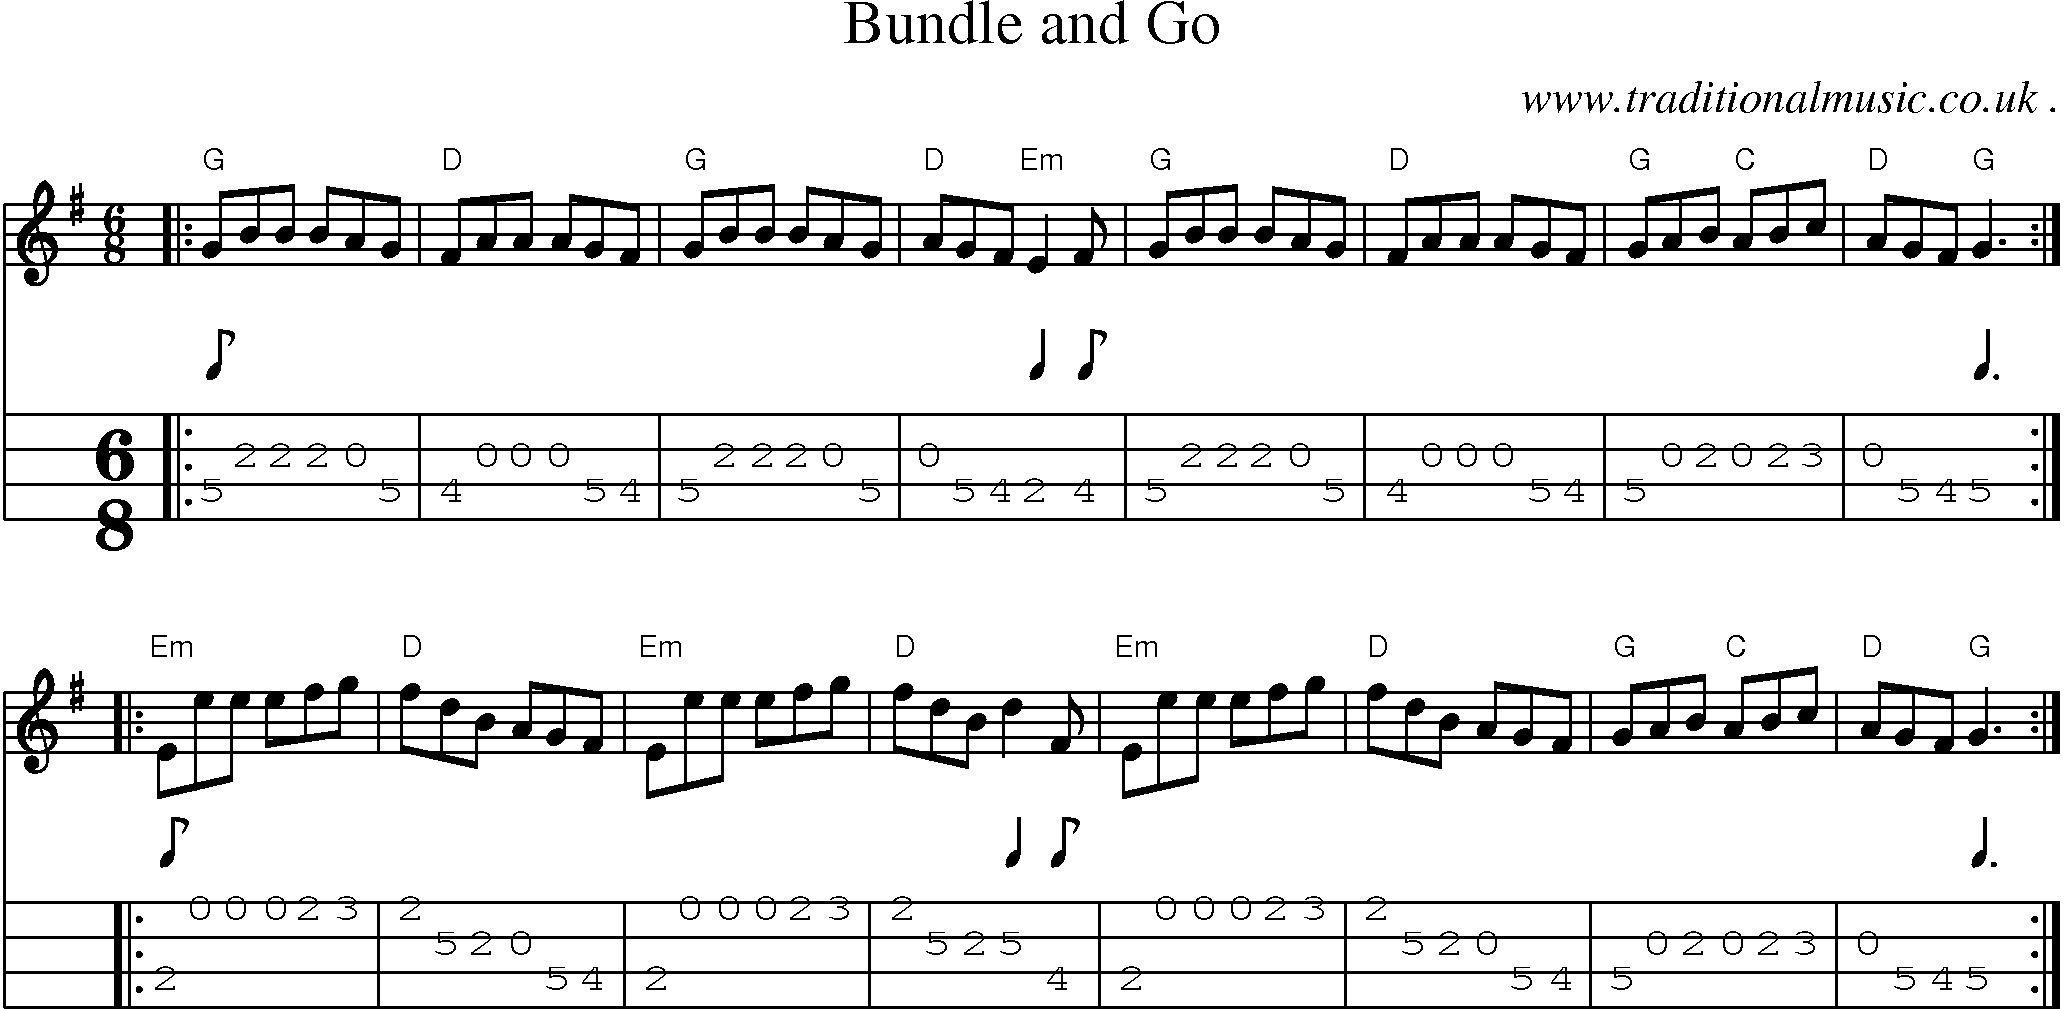 Sheet-music  score, Chords and Mandolin Tabs for Bundle And Go